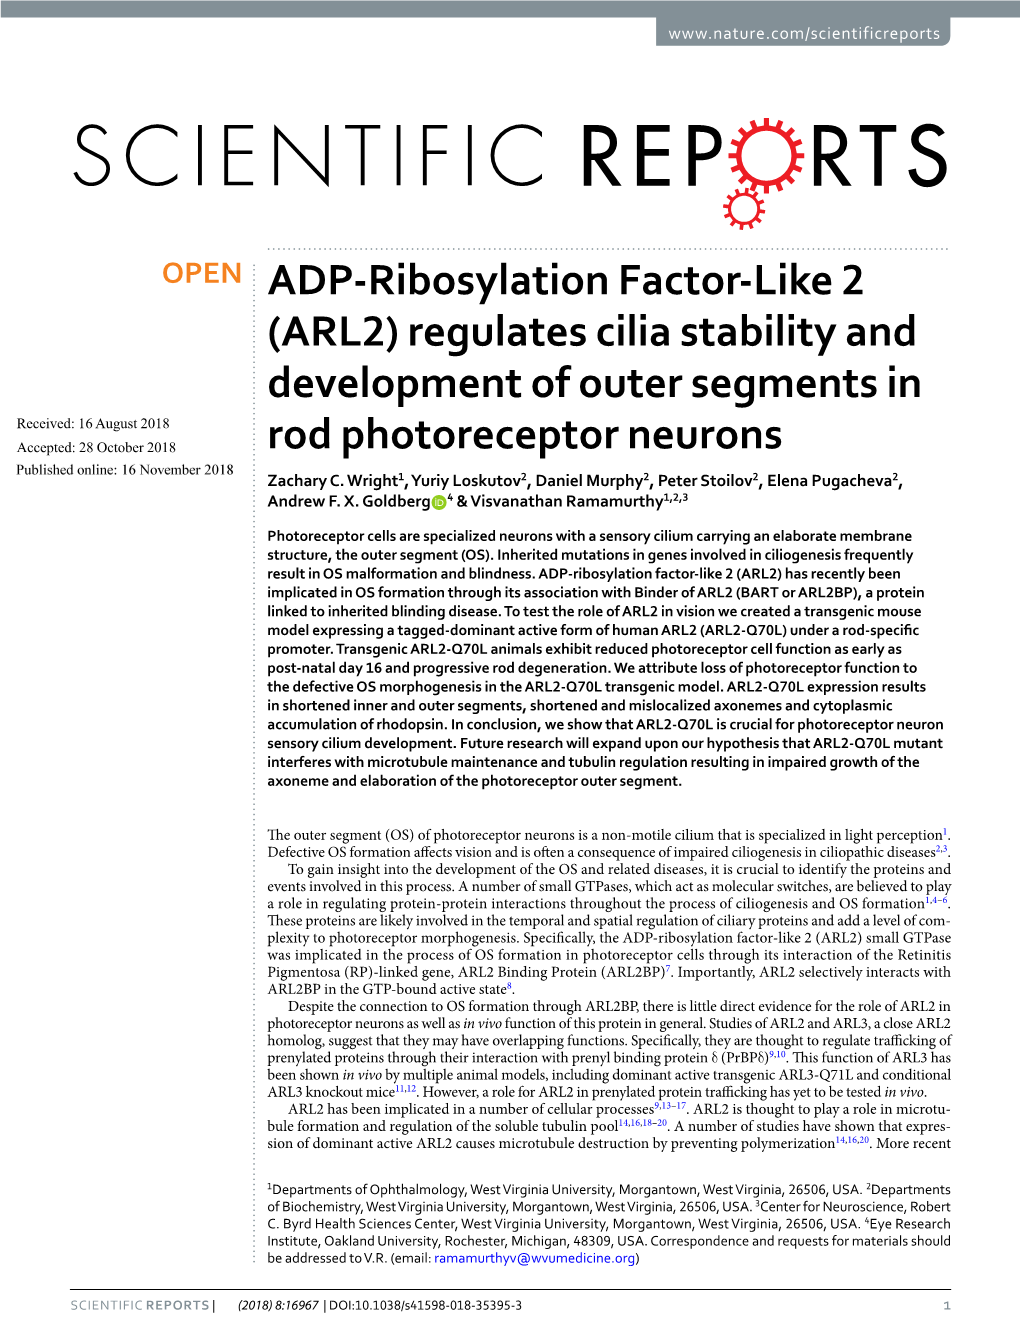 (ARL2) Regulates Cilia Stability and Development of Outer Segments In